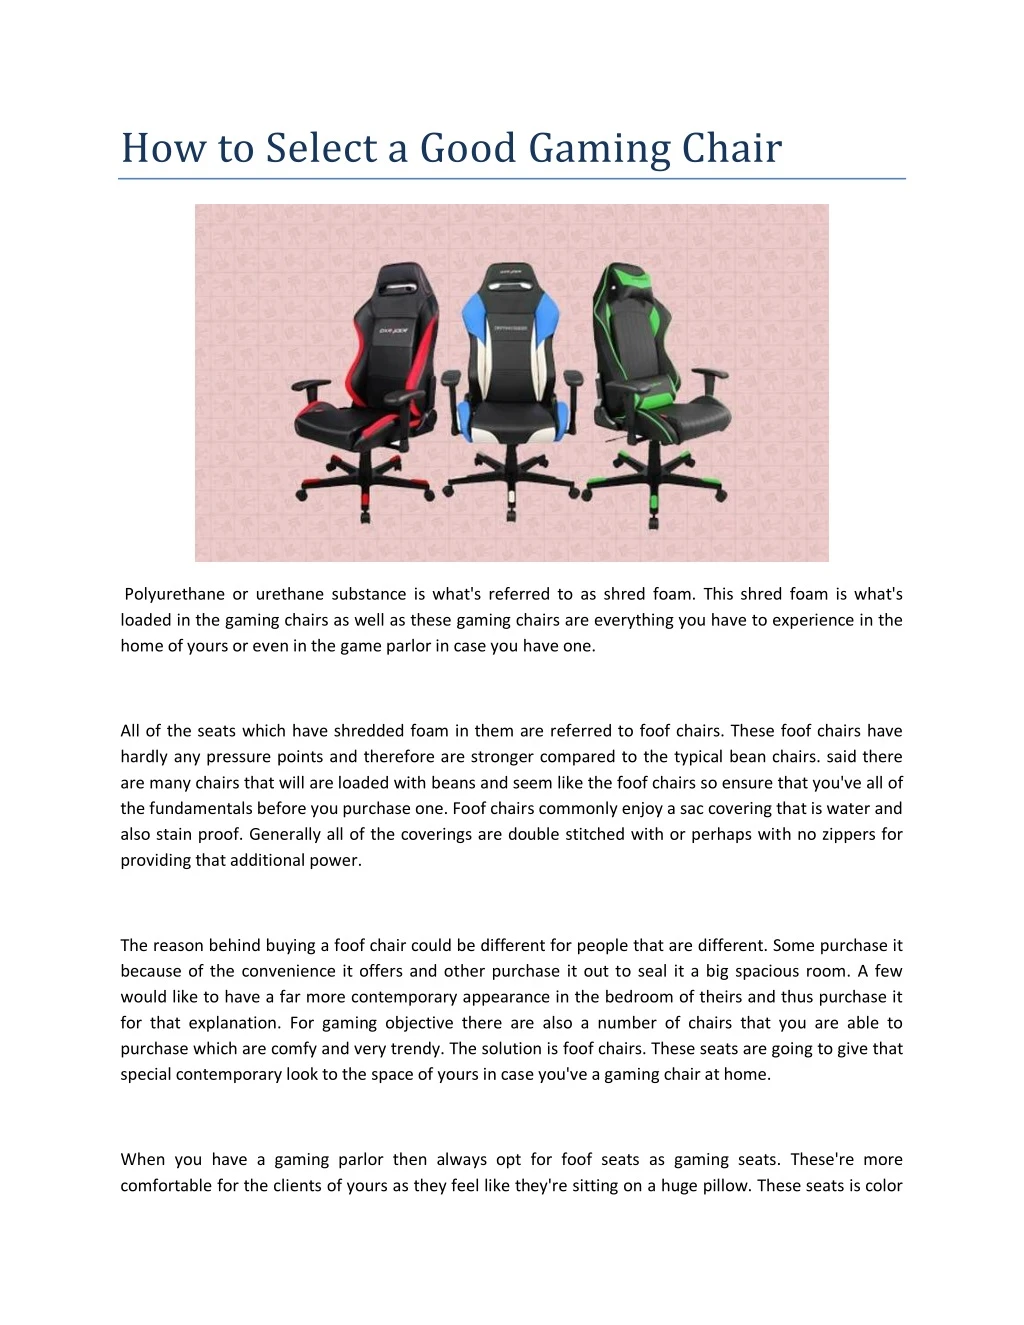 how to select a good gaming chair